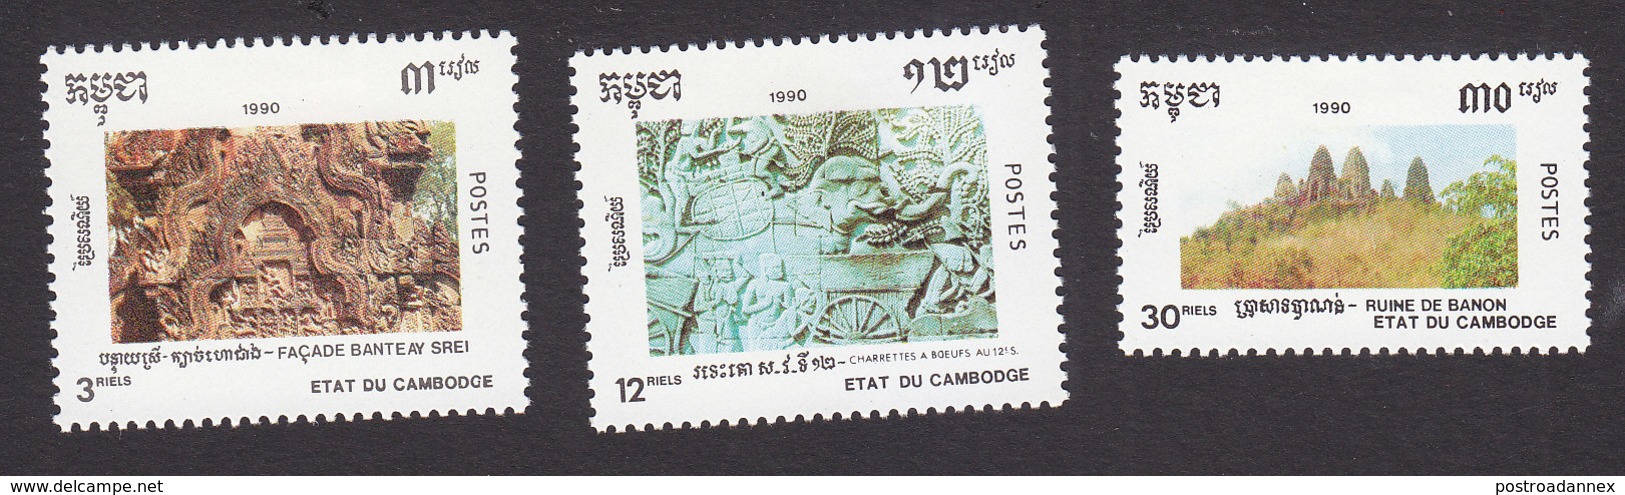 Cambodia, Scott #1046-1048, Mint Hinged, Khmer Culture, Issued 1990 - Cambodia